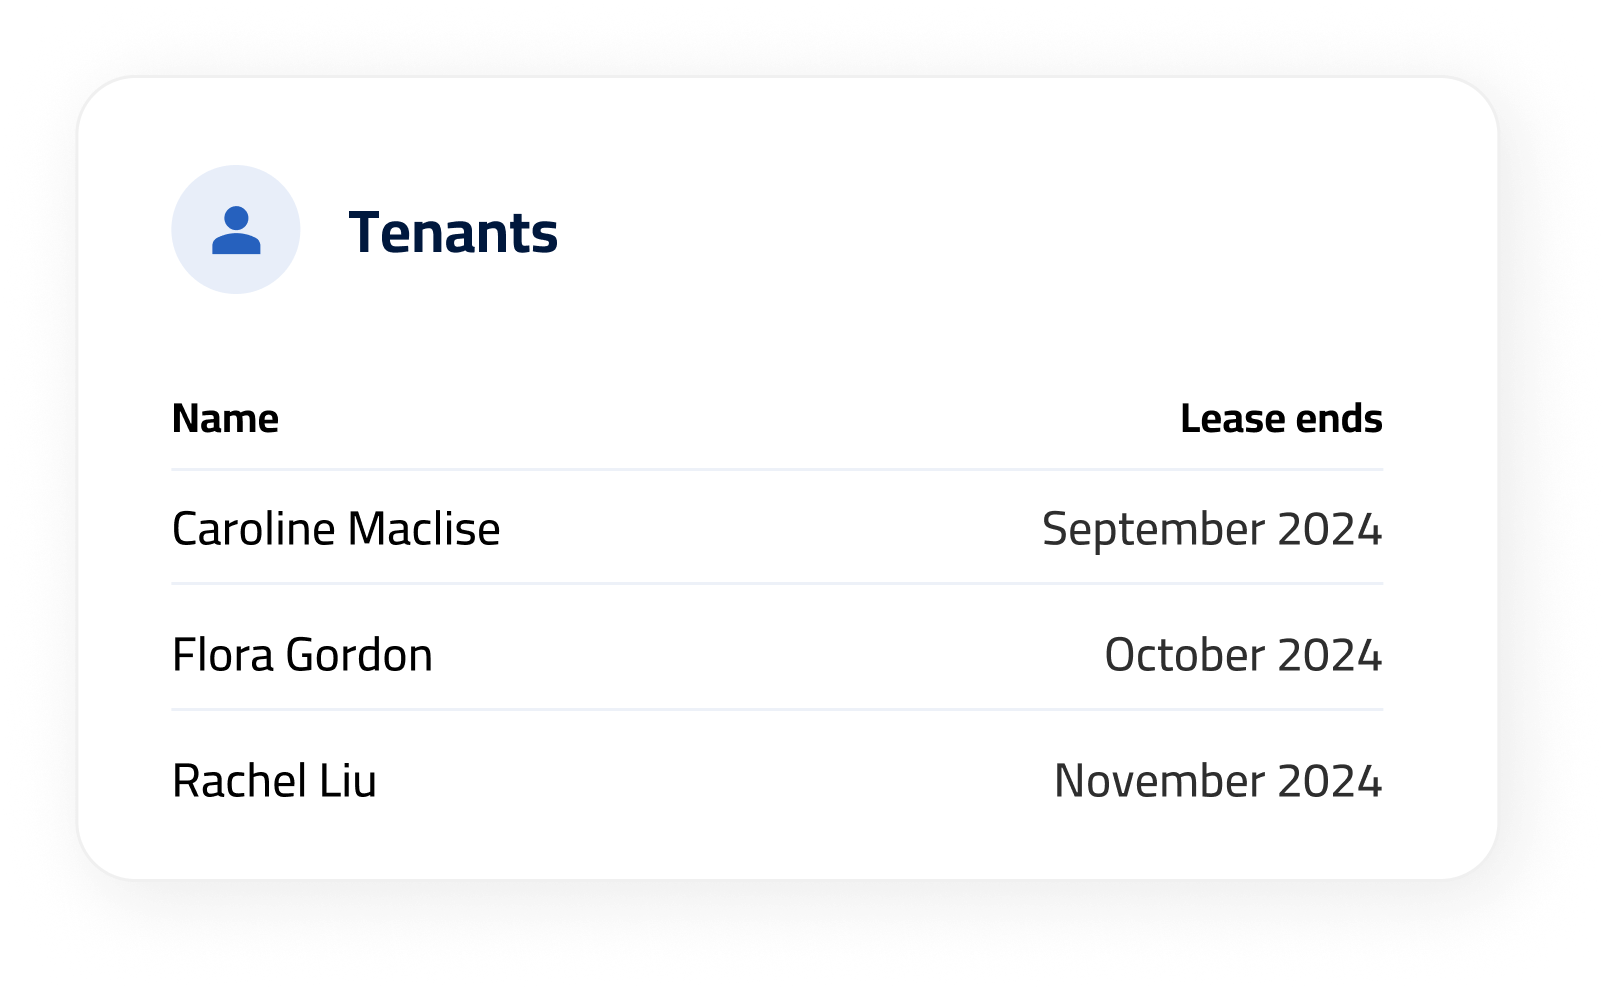 List of tenants and leases